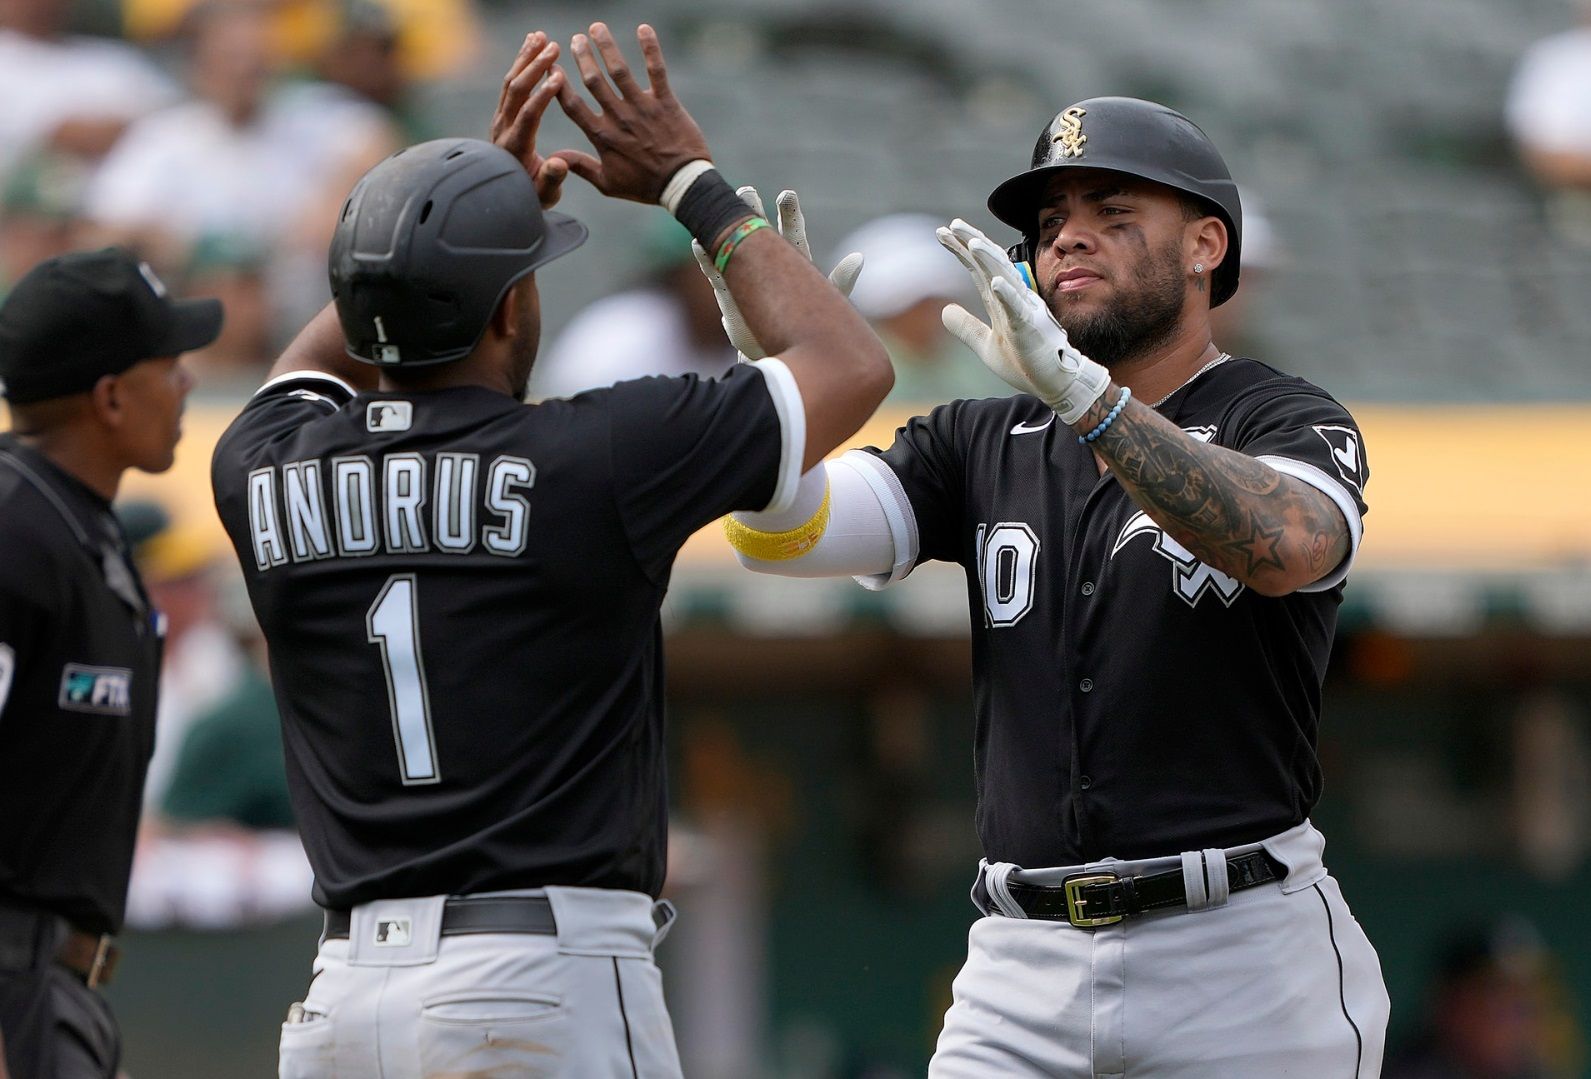 Andrus HR vs former team, surging White Sox 20 hits, rout A's